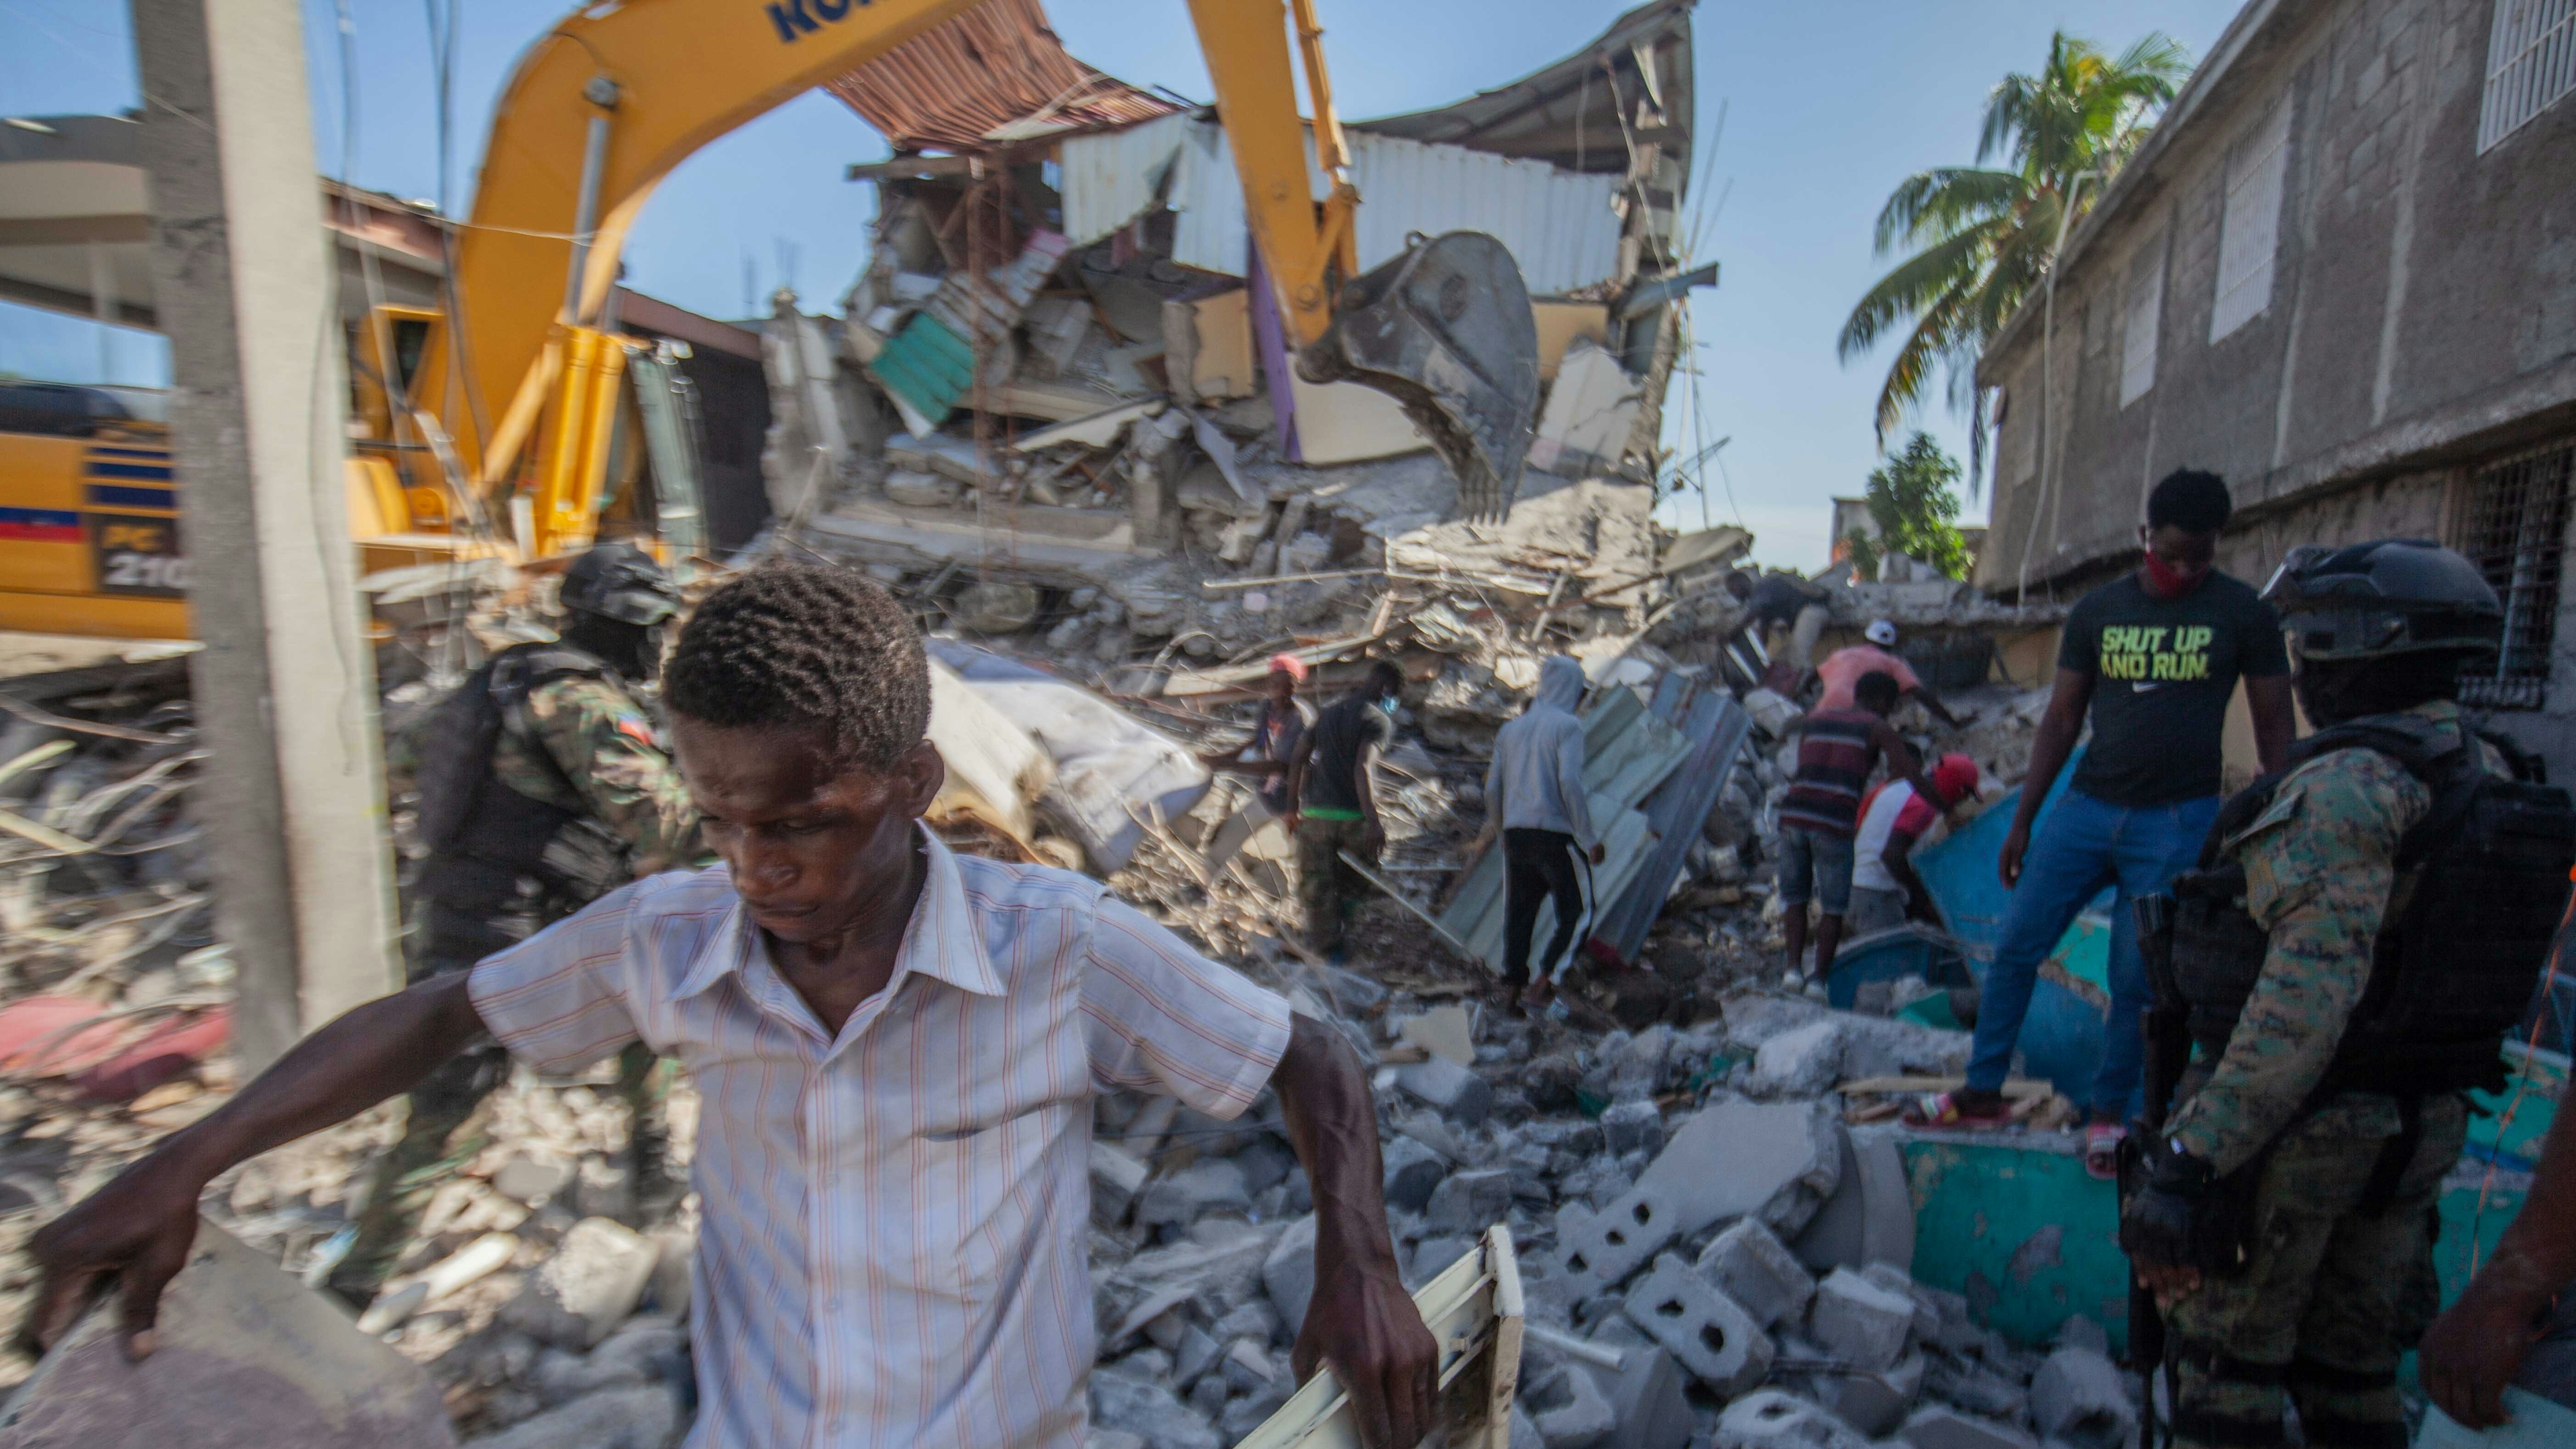 Haitians begin the work of recovering what materials can be after a 7.2-magnitude earthquake struck Haiti on August 15, 2021 in Les Cayes, Haiti.